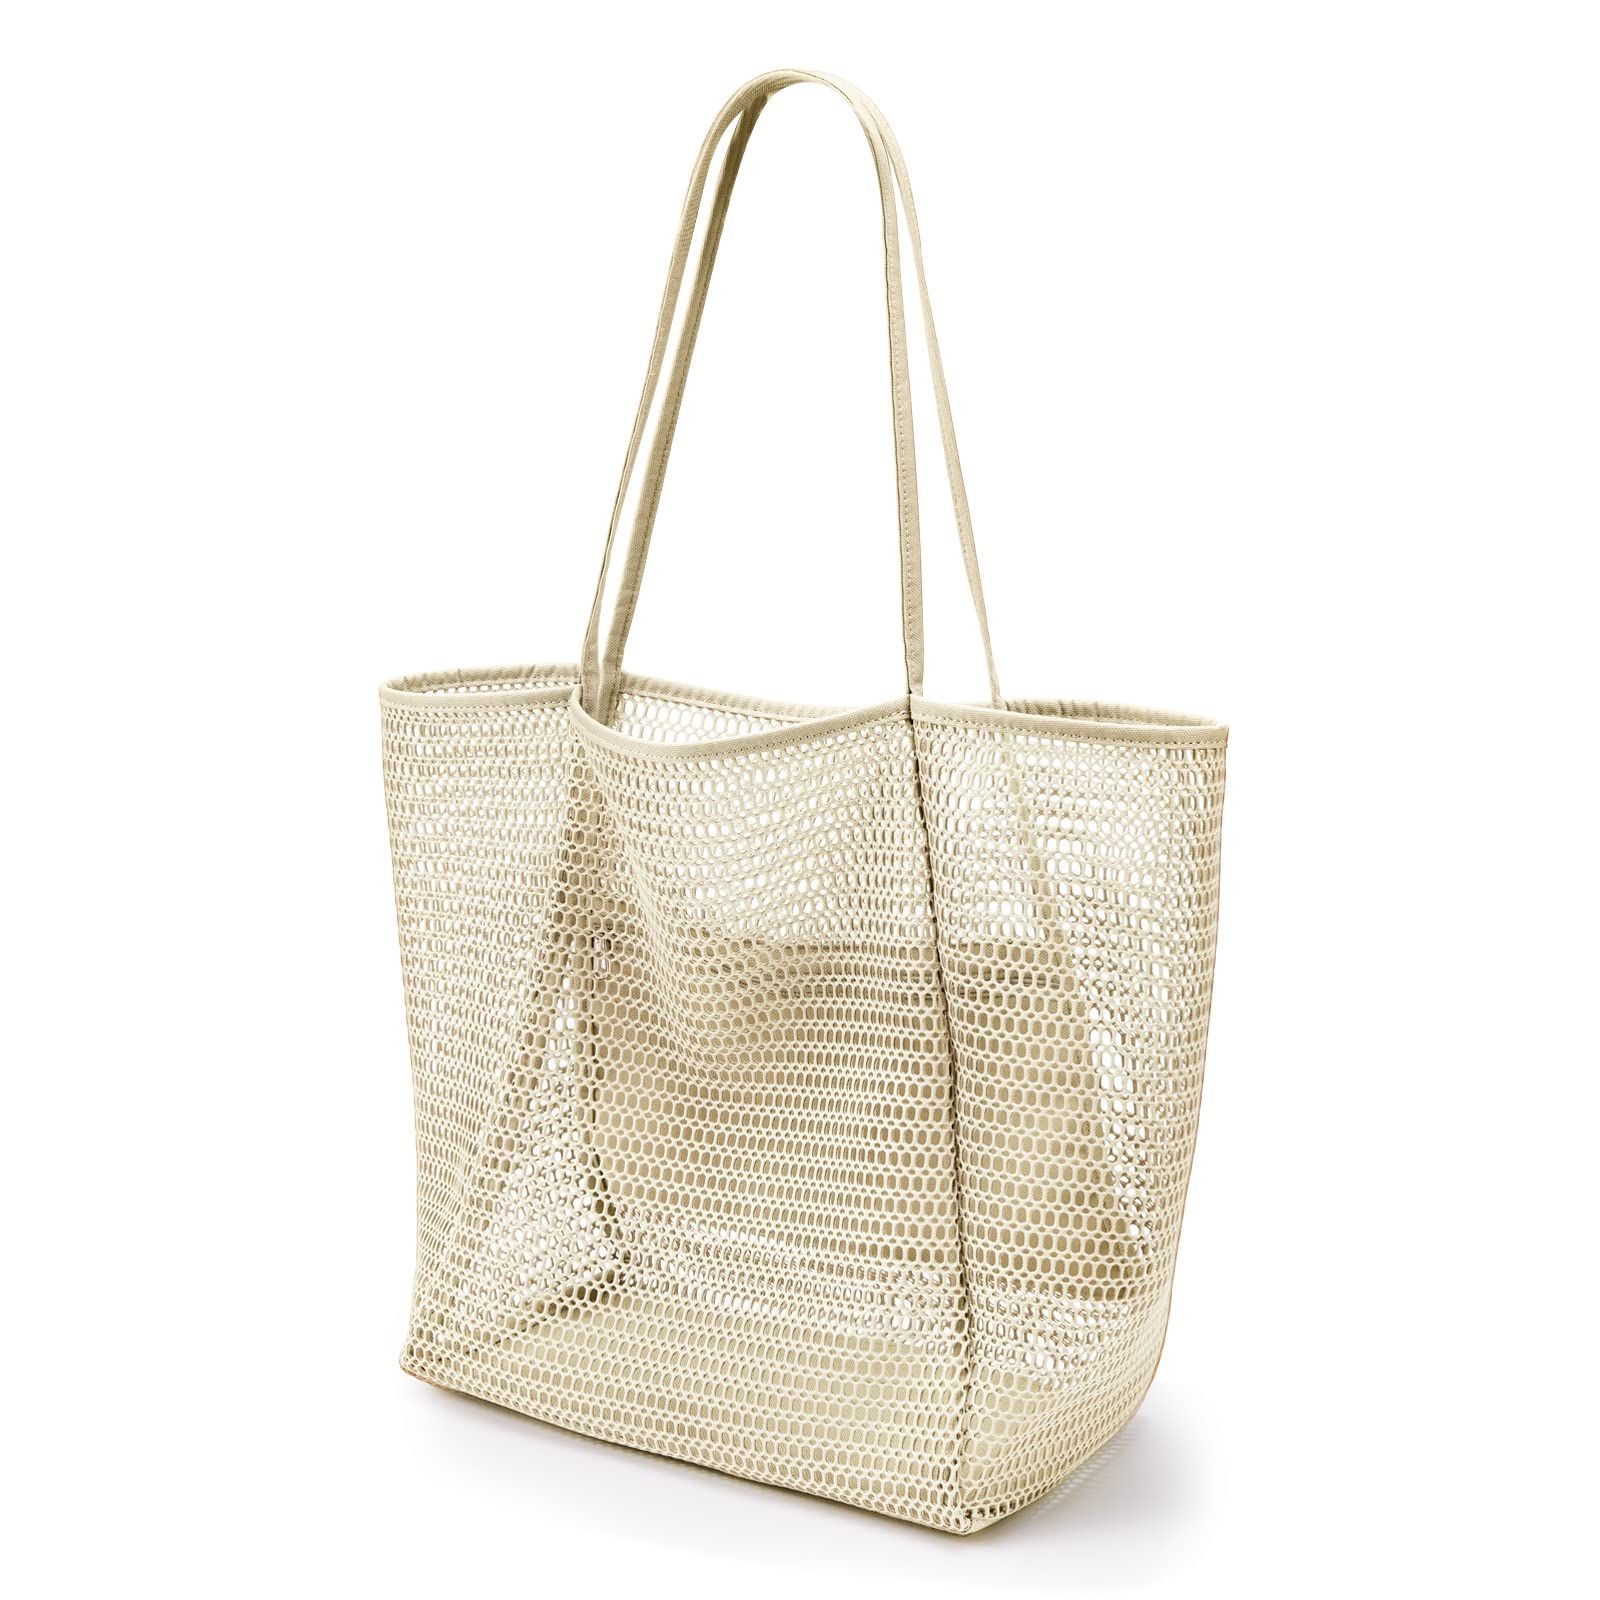 Buy Beach Tote Online In India  Etsy India